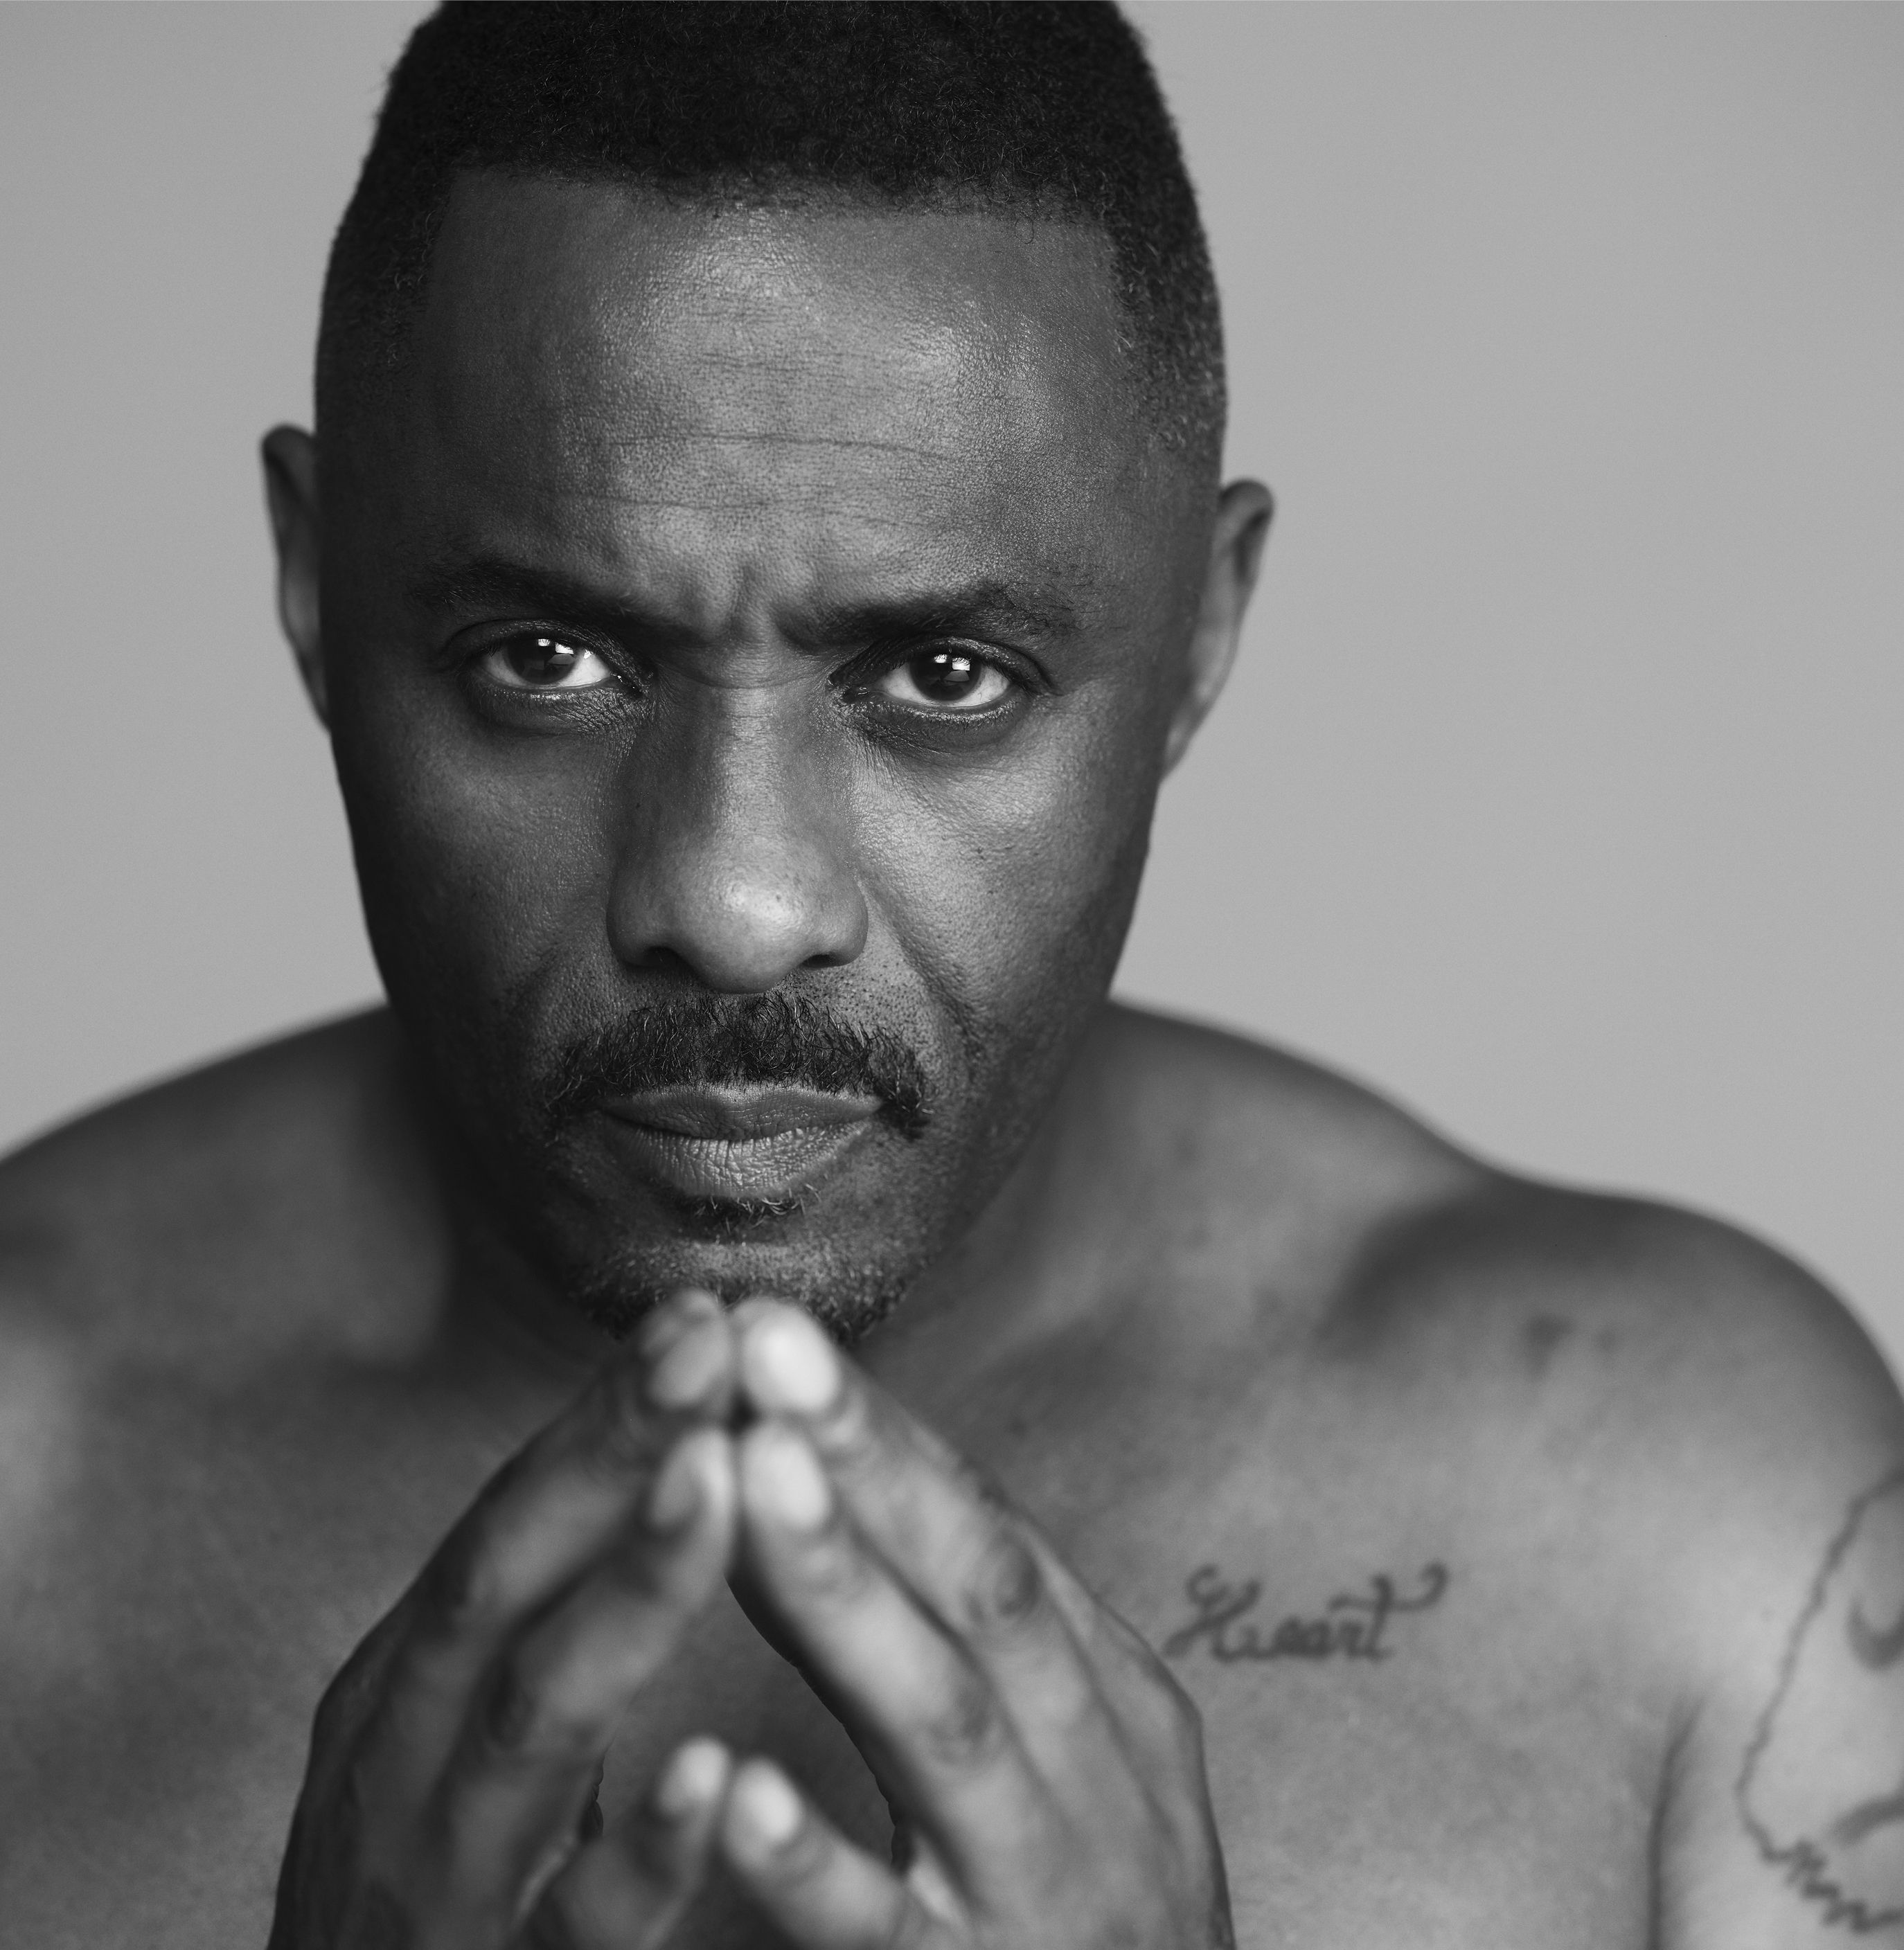 Jungle Rep Hd Sex - Idris Elba on the Future of Luther & the Private Life of a Public Figure